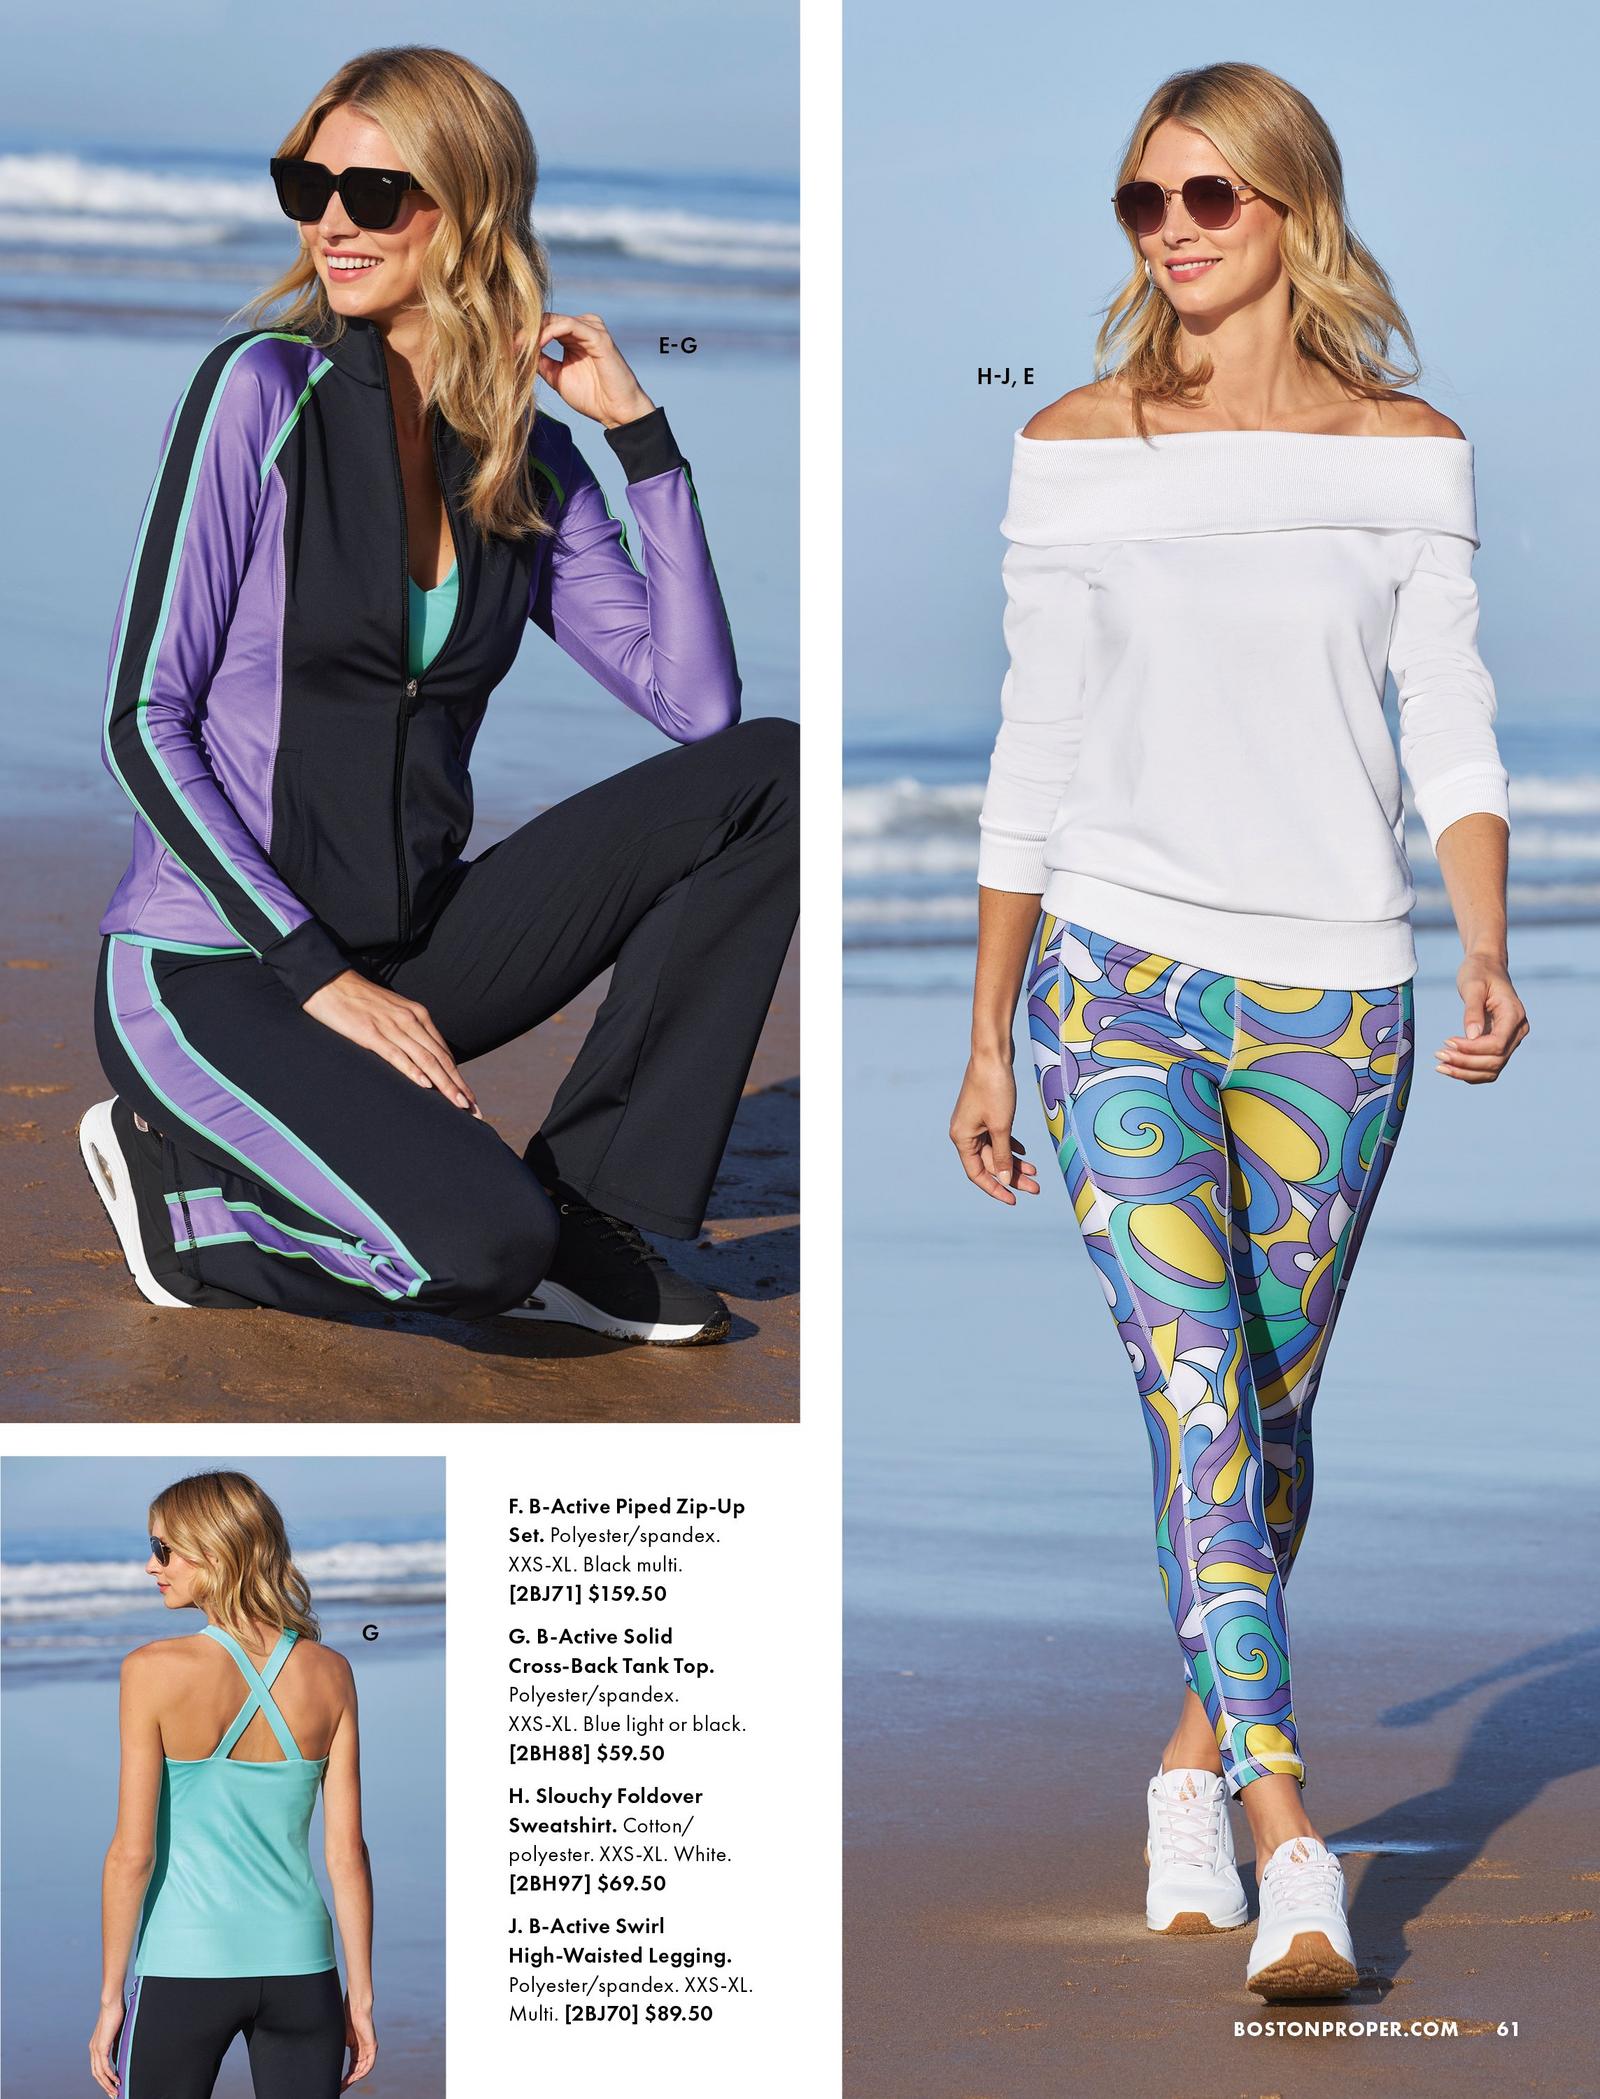 top left model wearing a black and purple colorblock warm-up, teal tank top, black sneakers, and sunglasses. bottom right model wearing a teal tank top and black leggings. right model wearing a white foldover sweater, multicolored printed leggings, and white sneakers, and sunglasses.